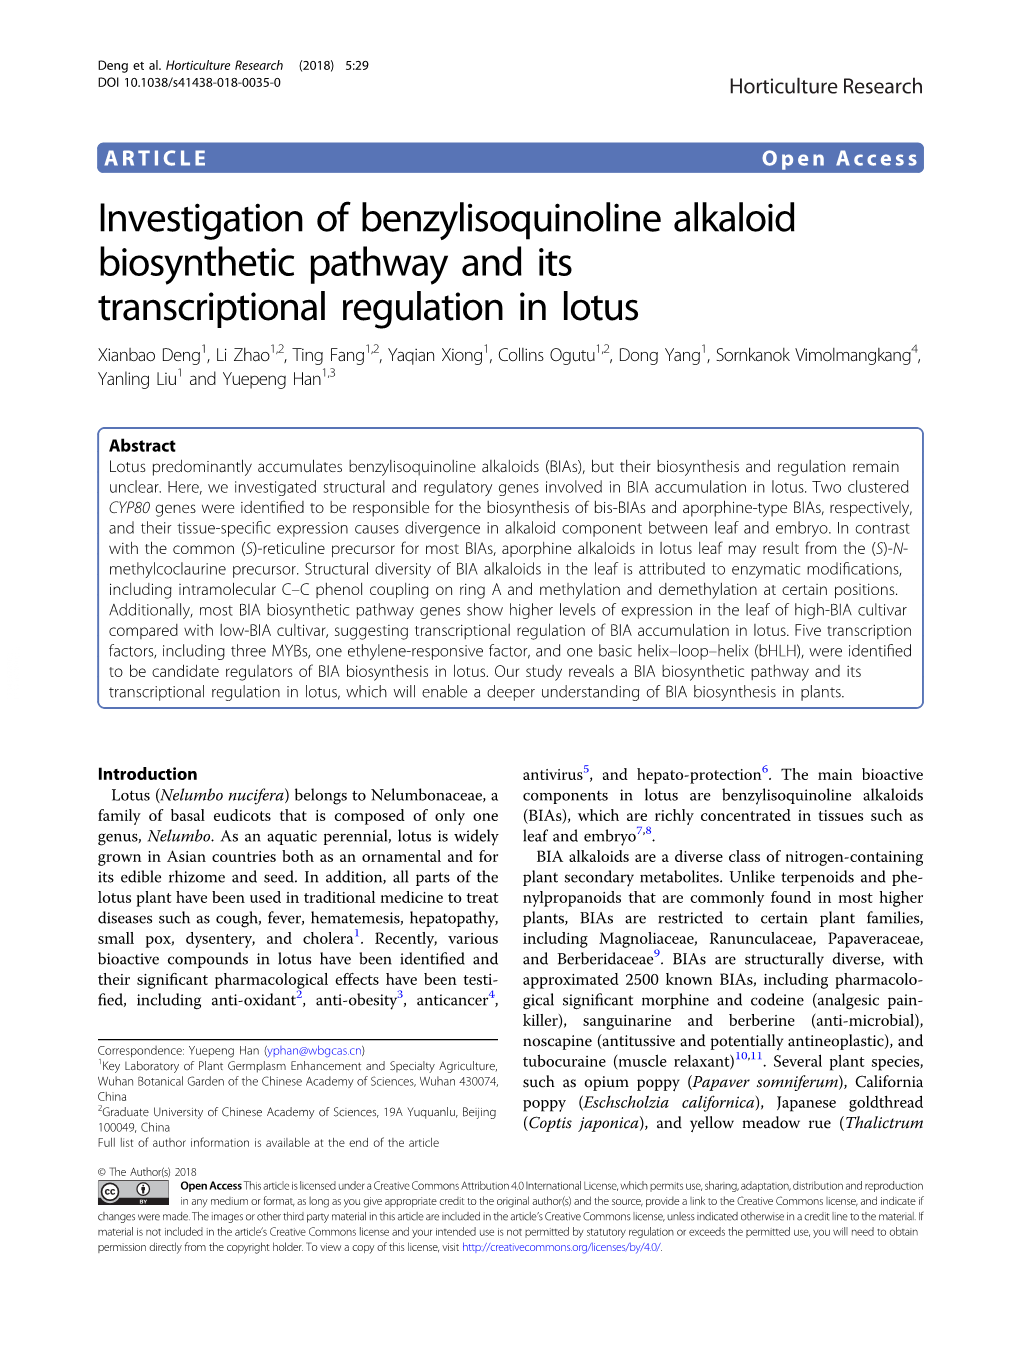 Investigation of Benzylisoquinoline Alkaloid Biosynthetic Pathway And